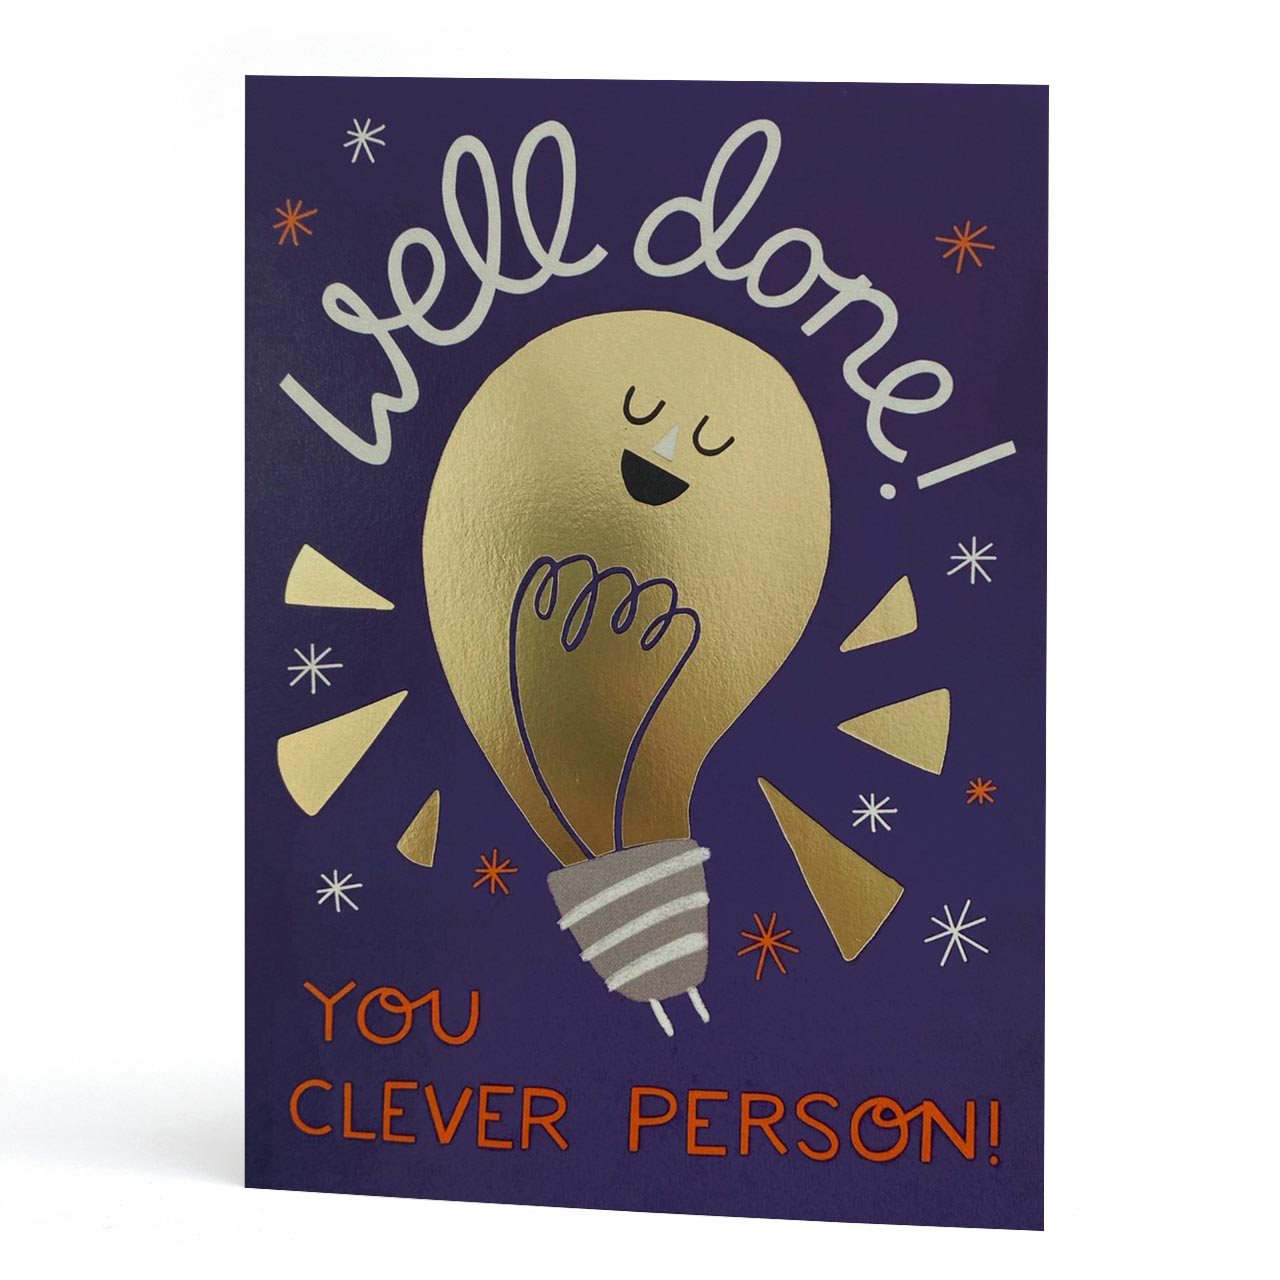 Clever Person Gold Foil Greeting Card